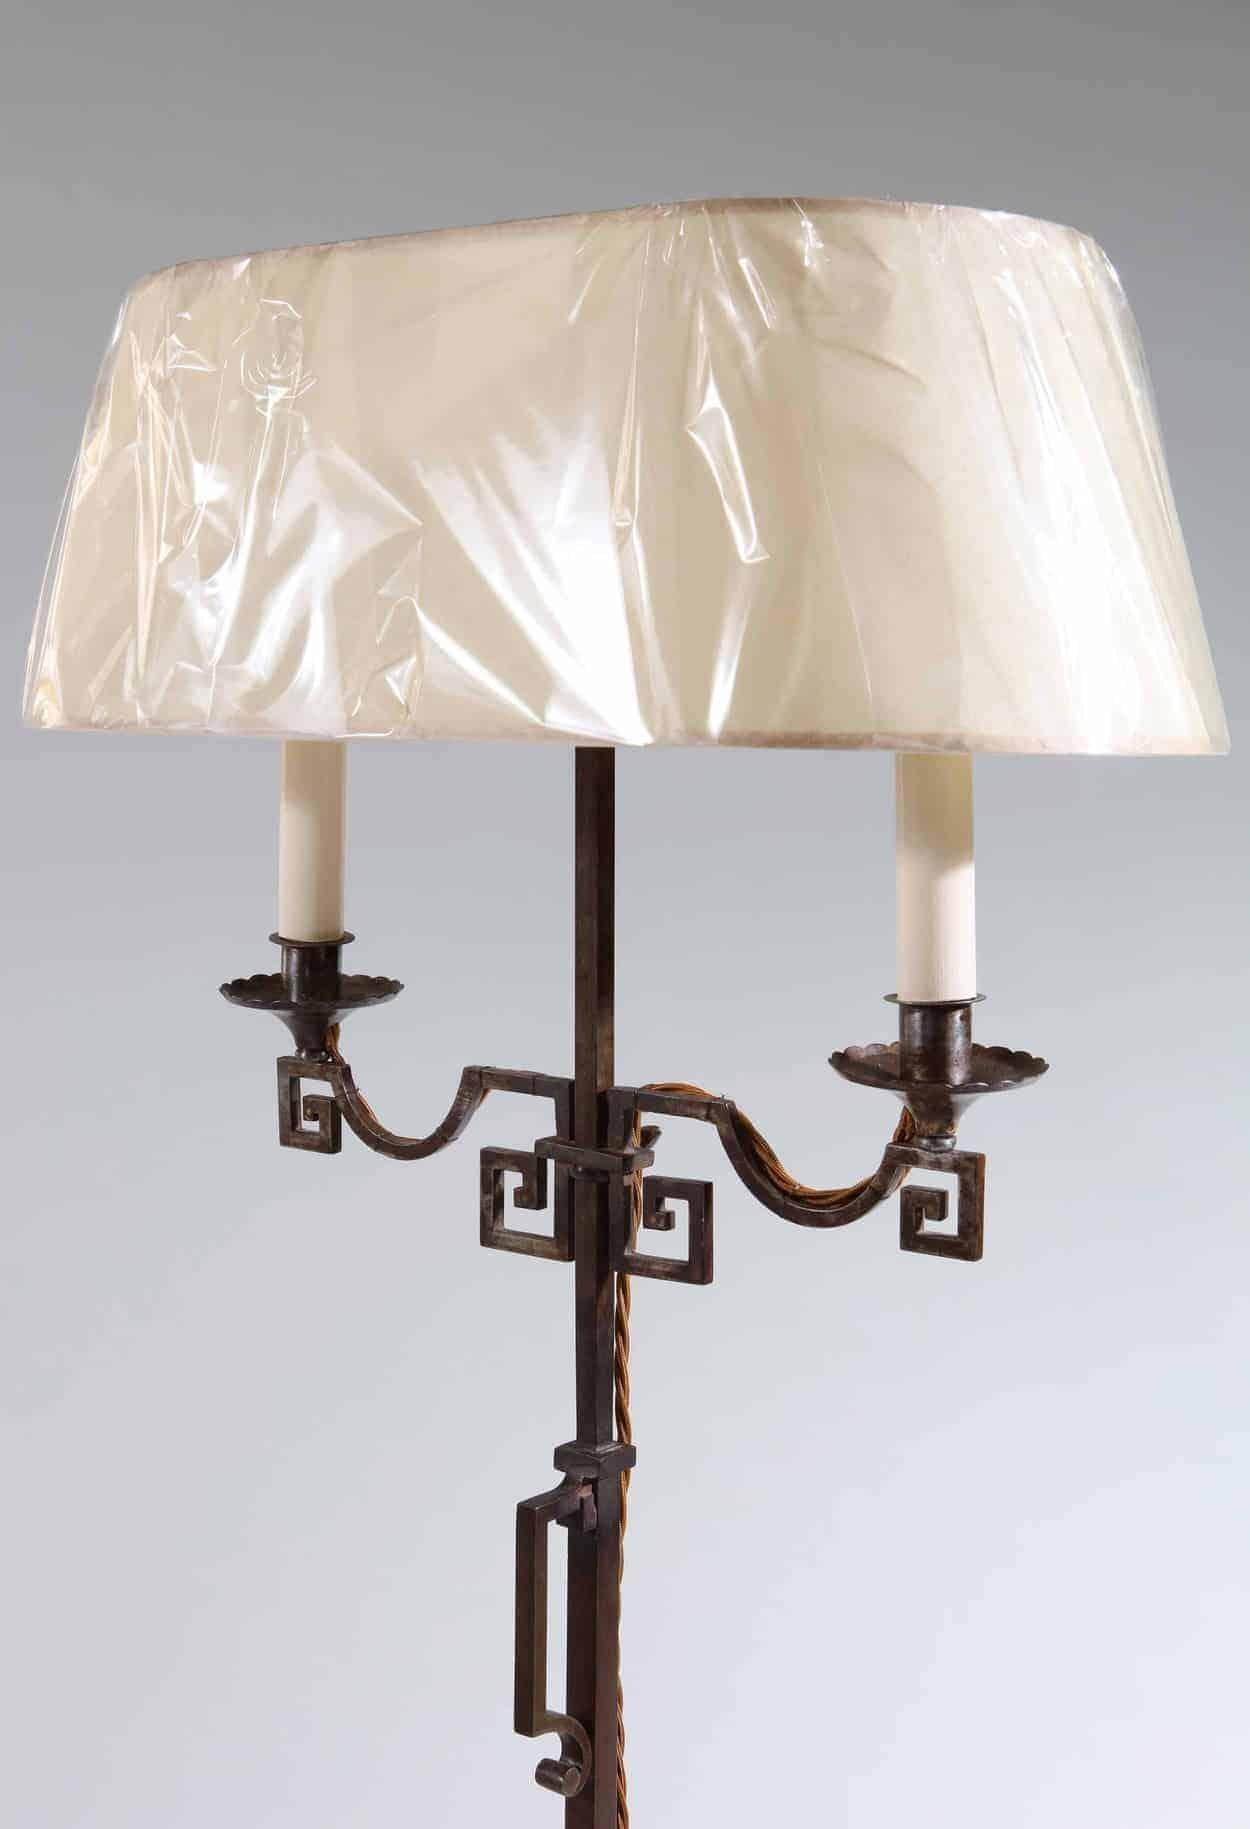 French Patinated Steel Floor Standing Bouillotte Lamp Attributed Jansen In Good Condition For Sale In London, by appointment only